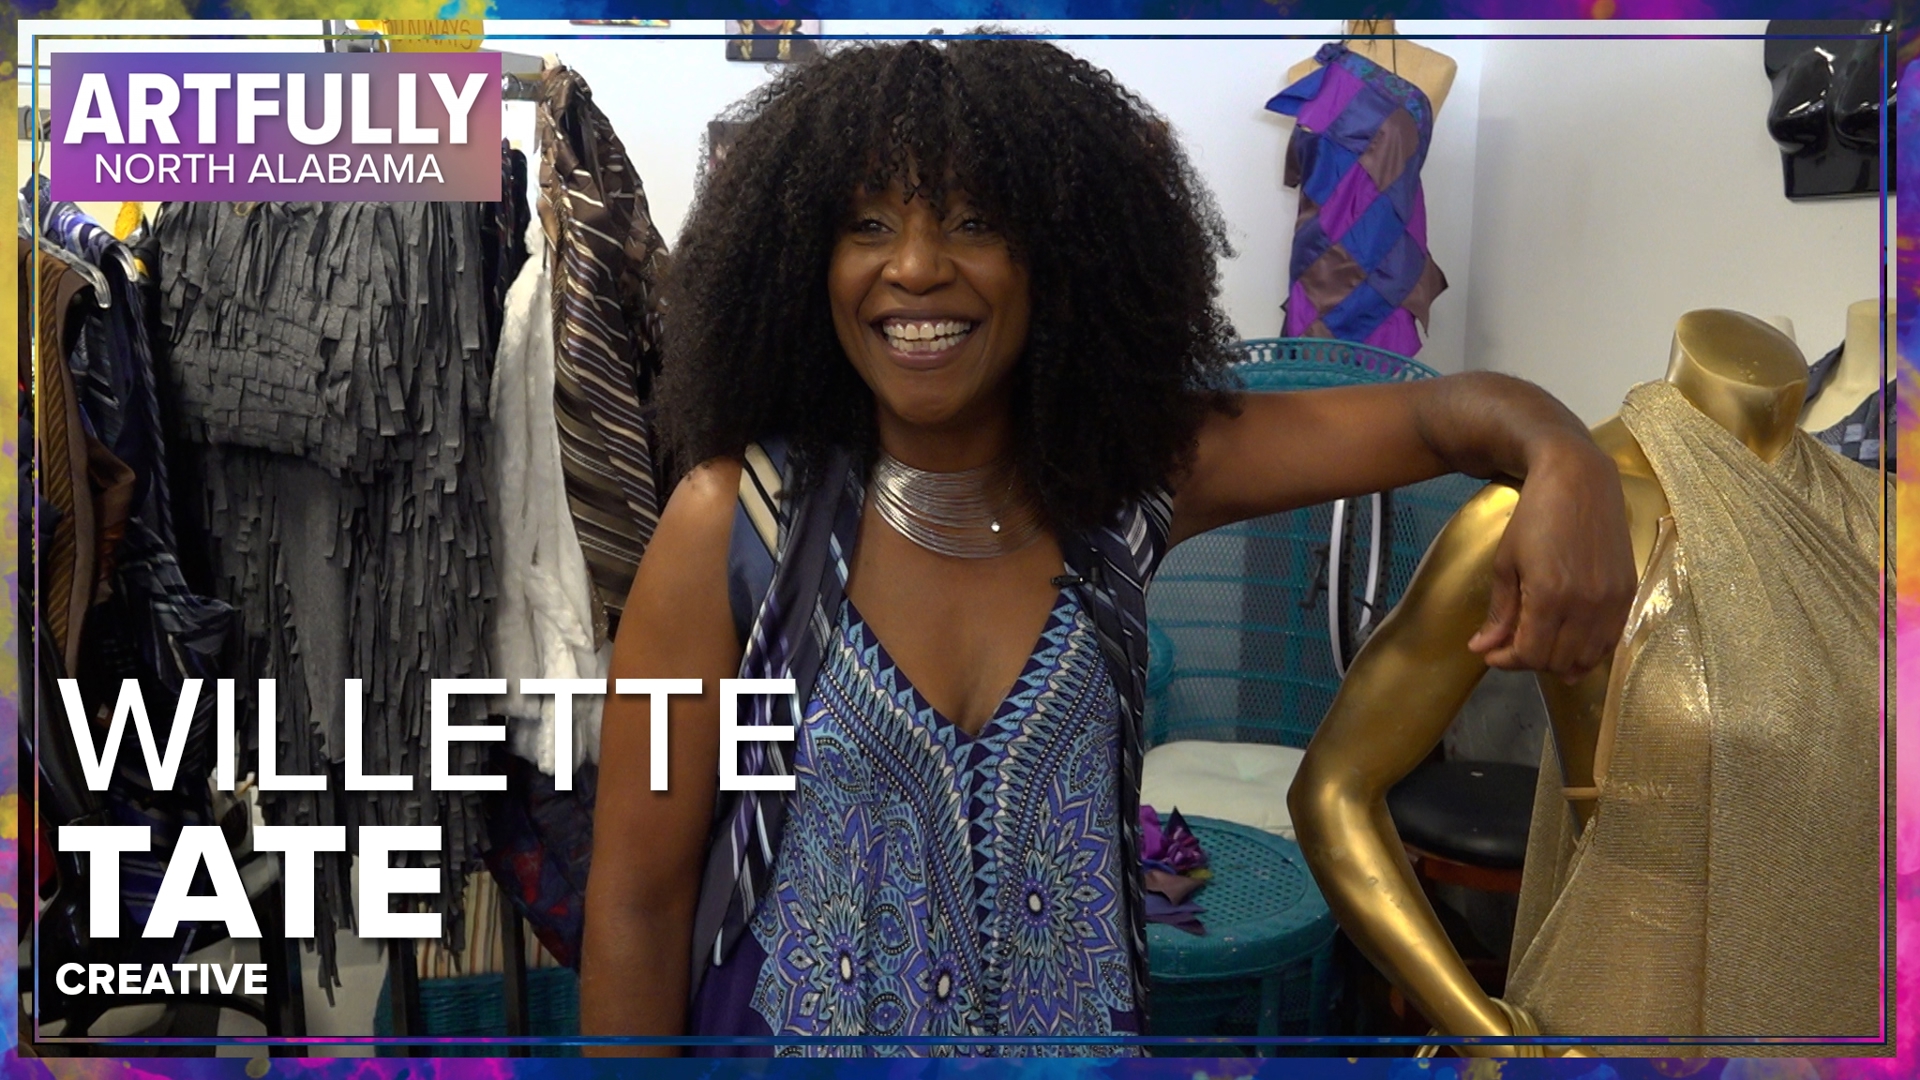 From paper mache to painting, Willette Tate does it all!